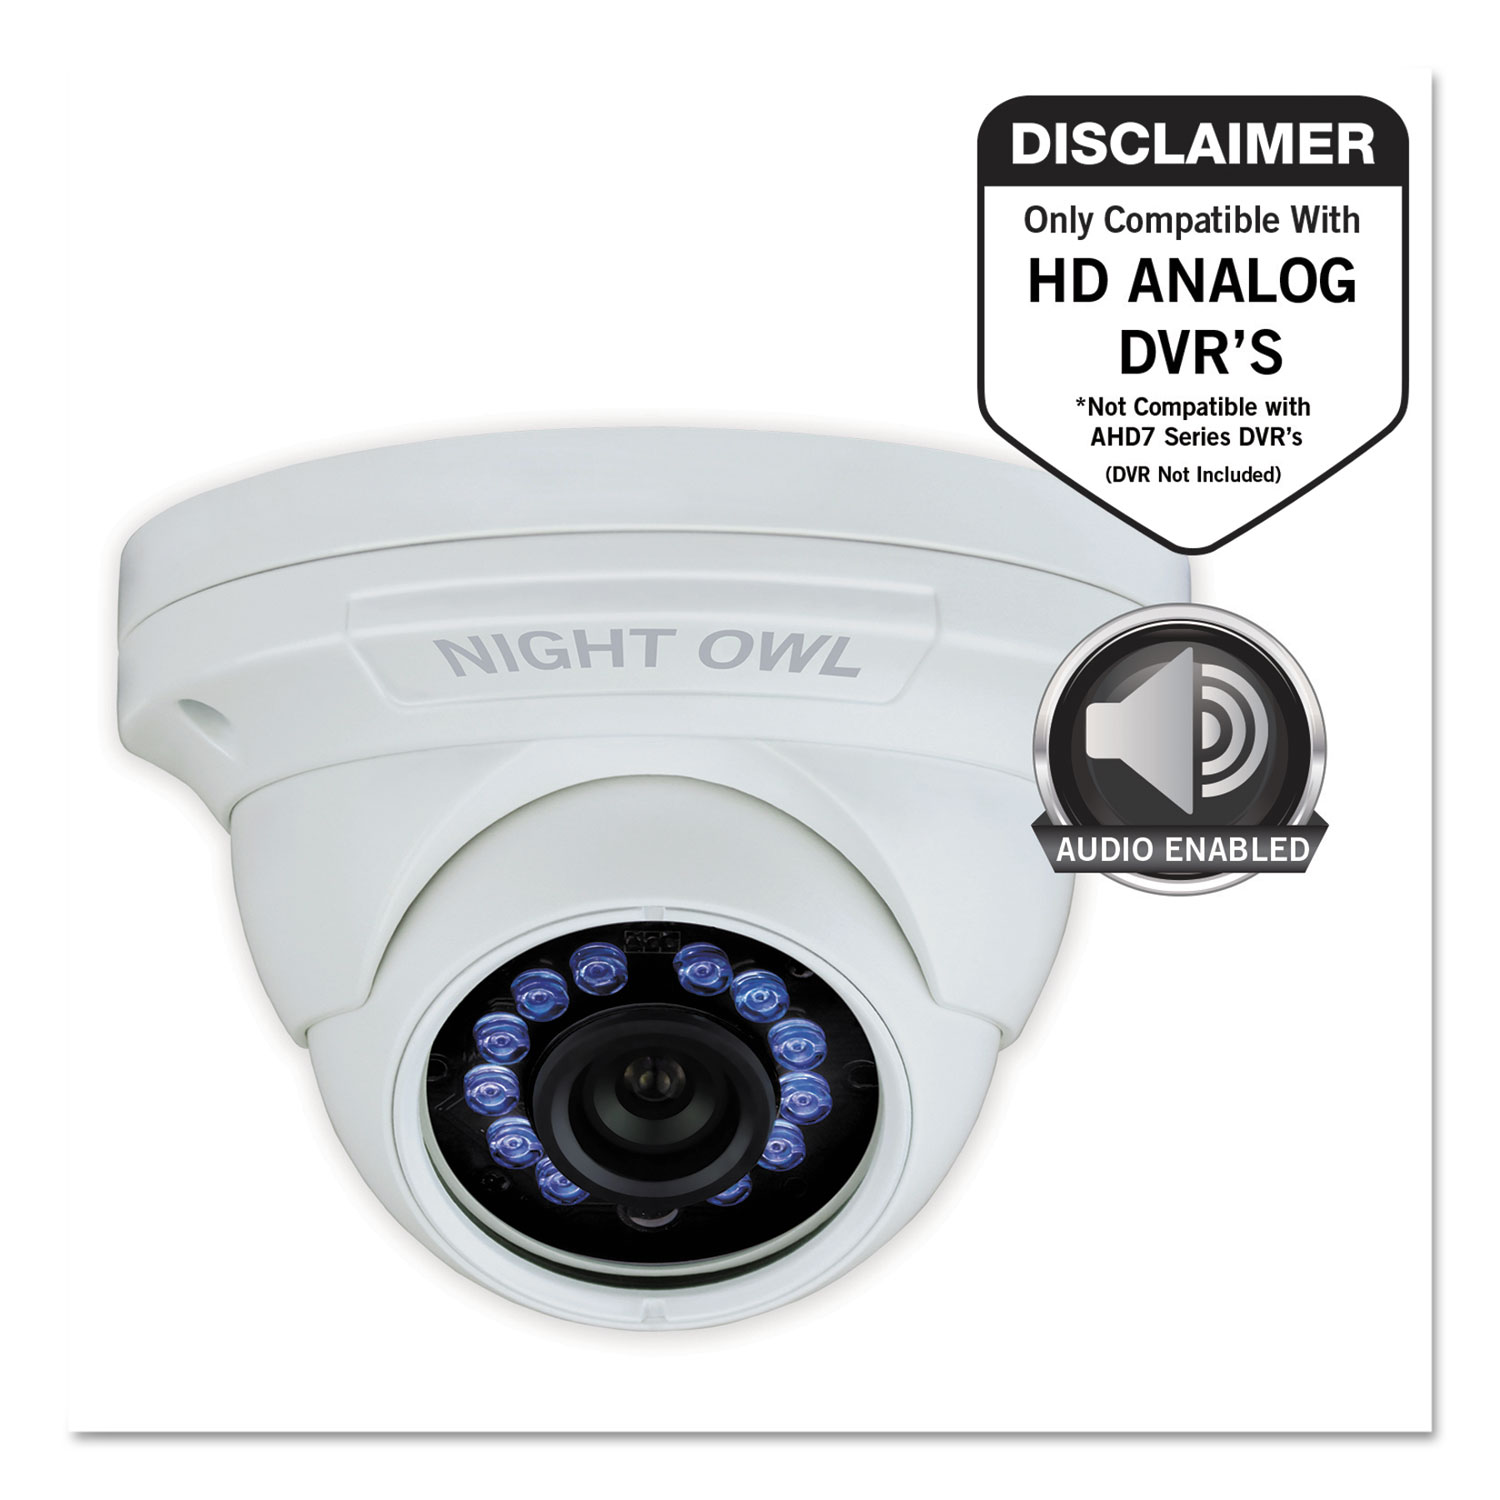 Add-On HD Wired Audio-Enabled Security Dome Camera, 1080p Resolution